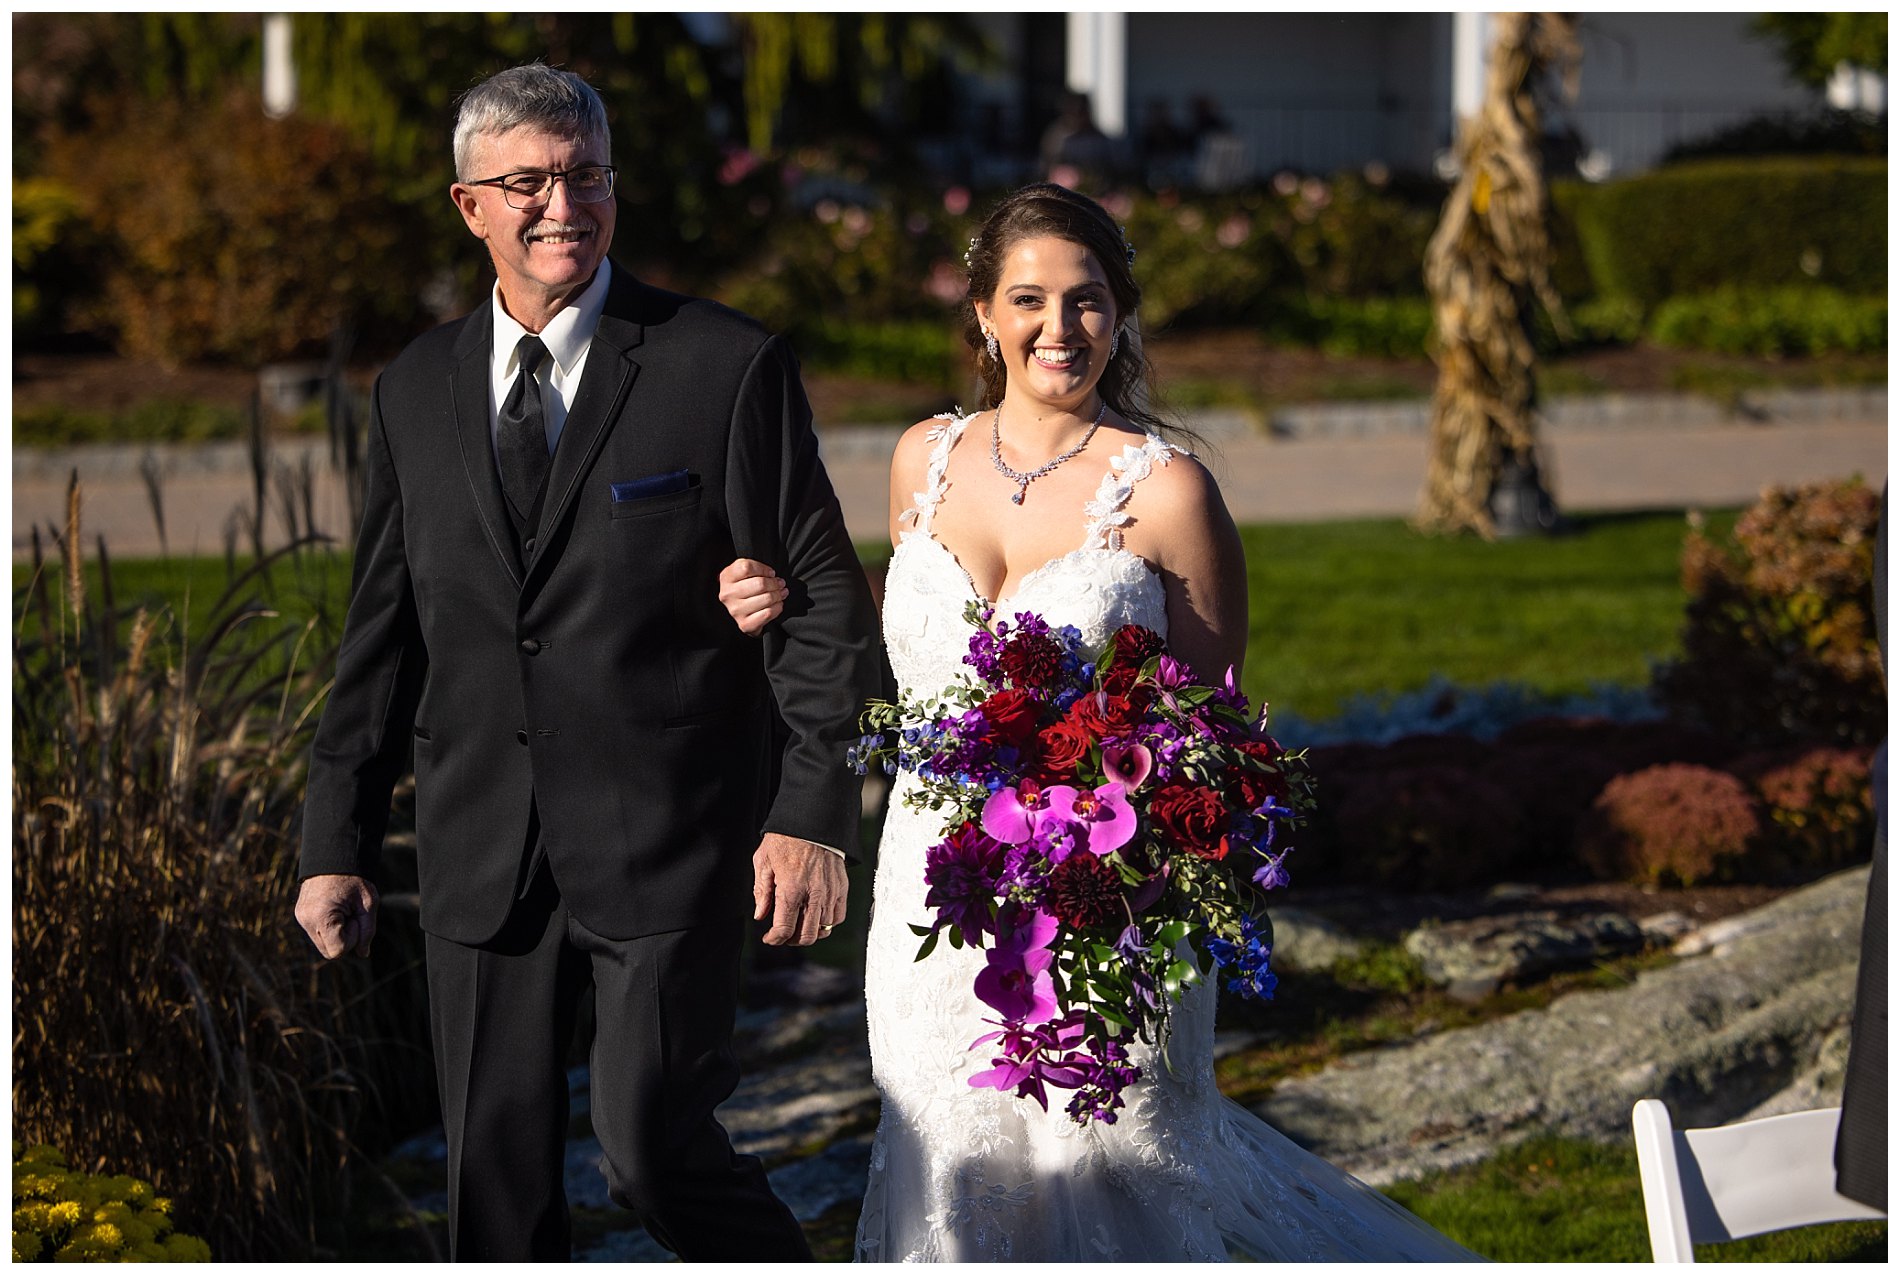 father of the bride walks daughter down aisle at wedding in New Castle, NH